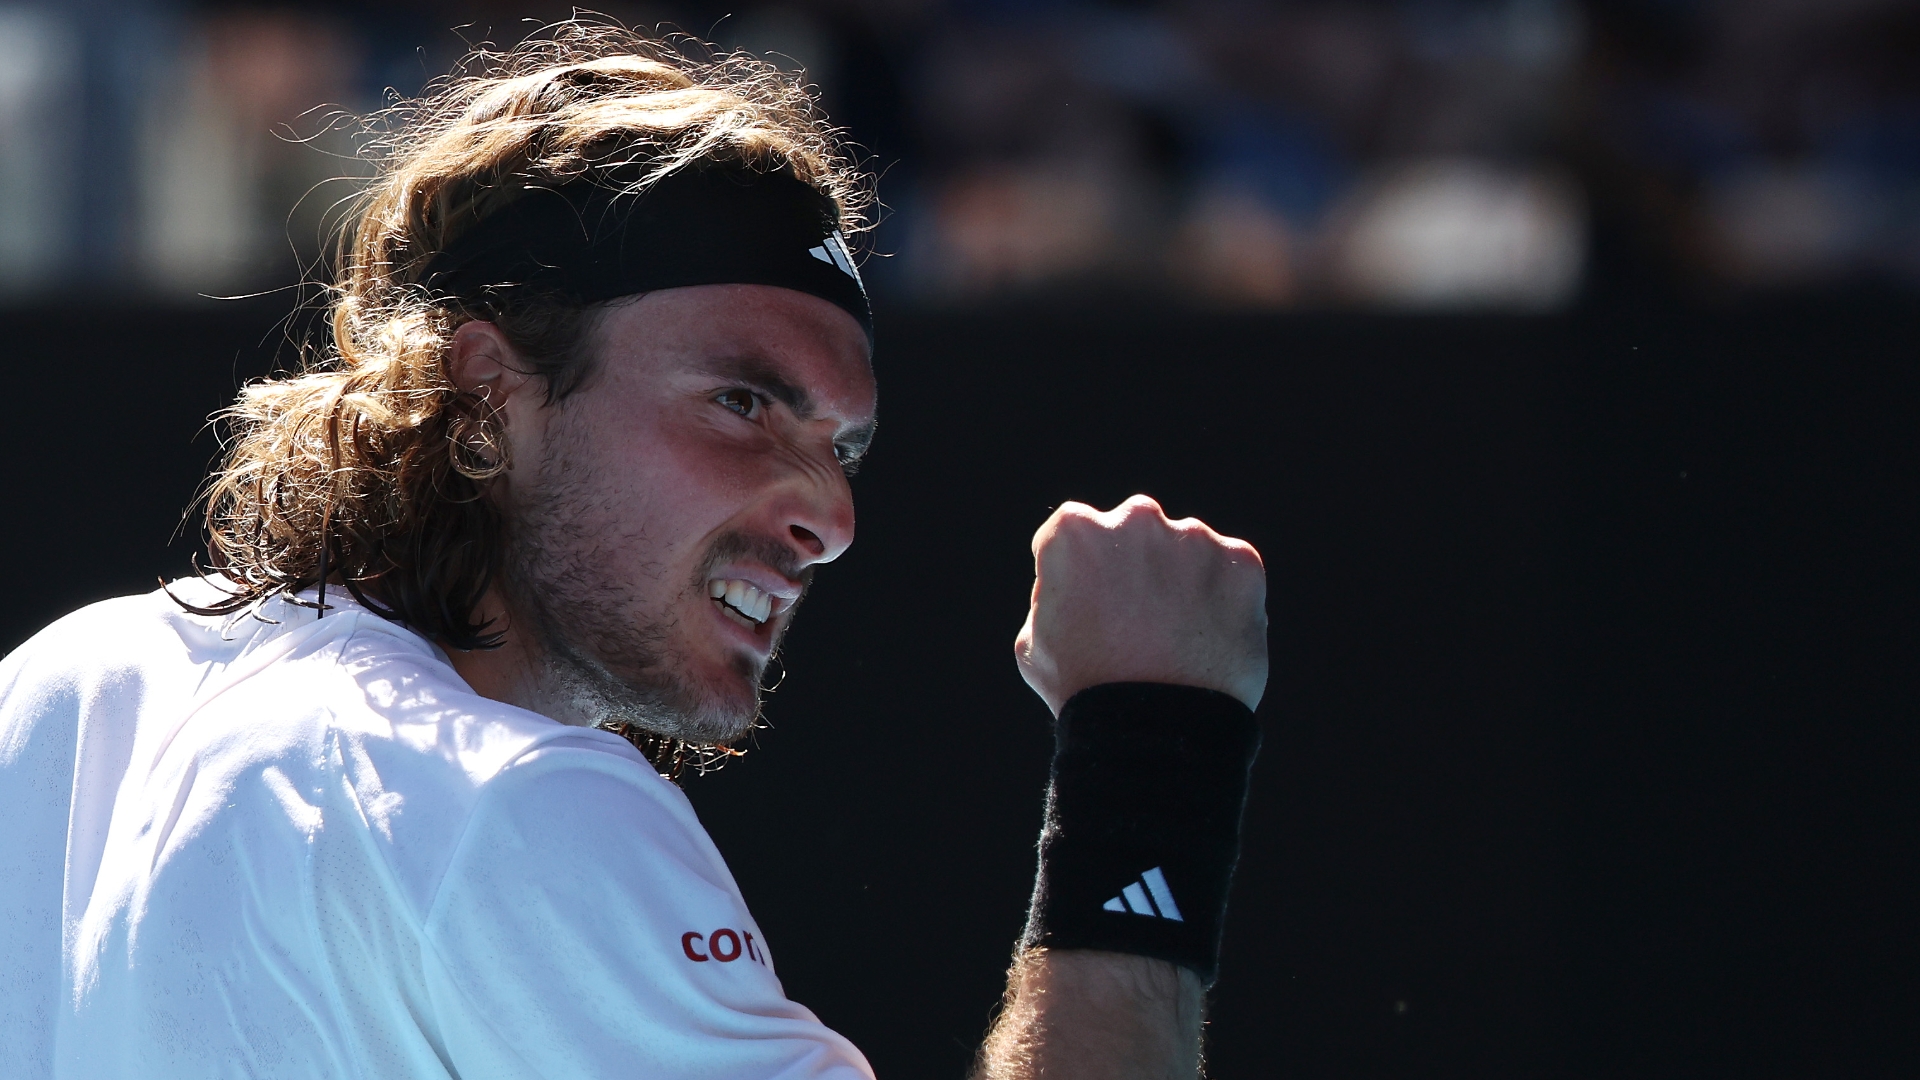 Tsitsipas somehow prevails to win magnificent rally - Stream the Video